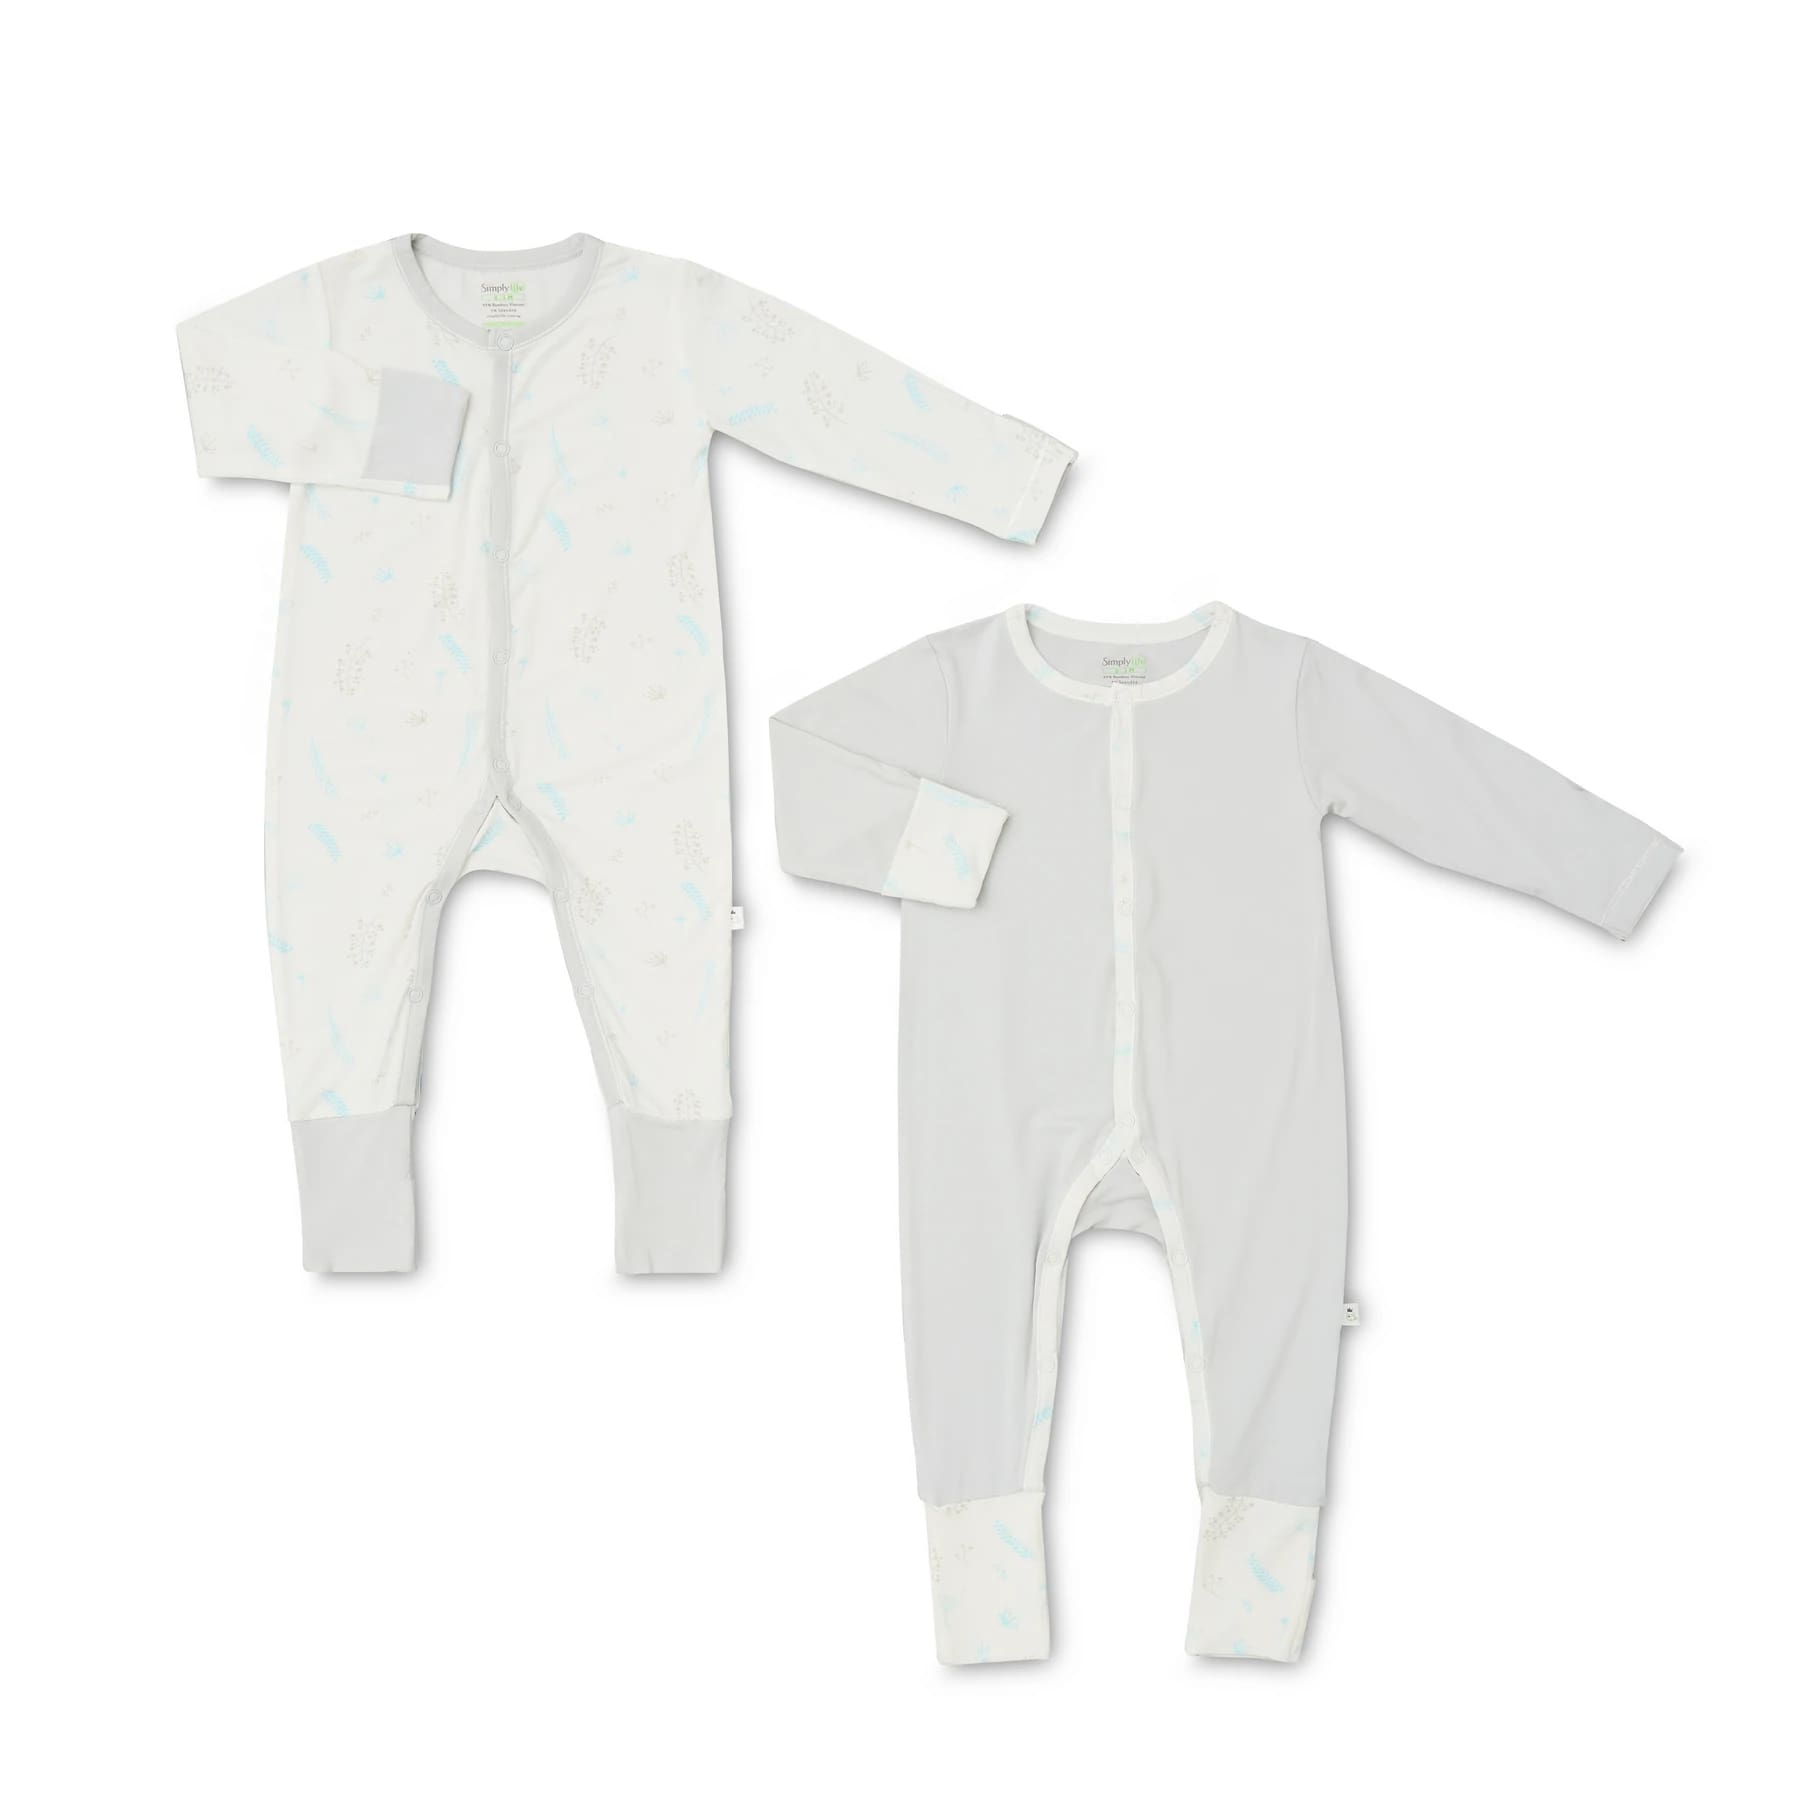 Simply Life Bamboo Sleepsuits L/S front snap button folded mitten & footie 2pcs - Breeze & Grey (SLWR-38BRGY2)